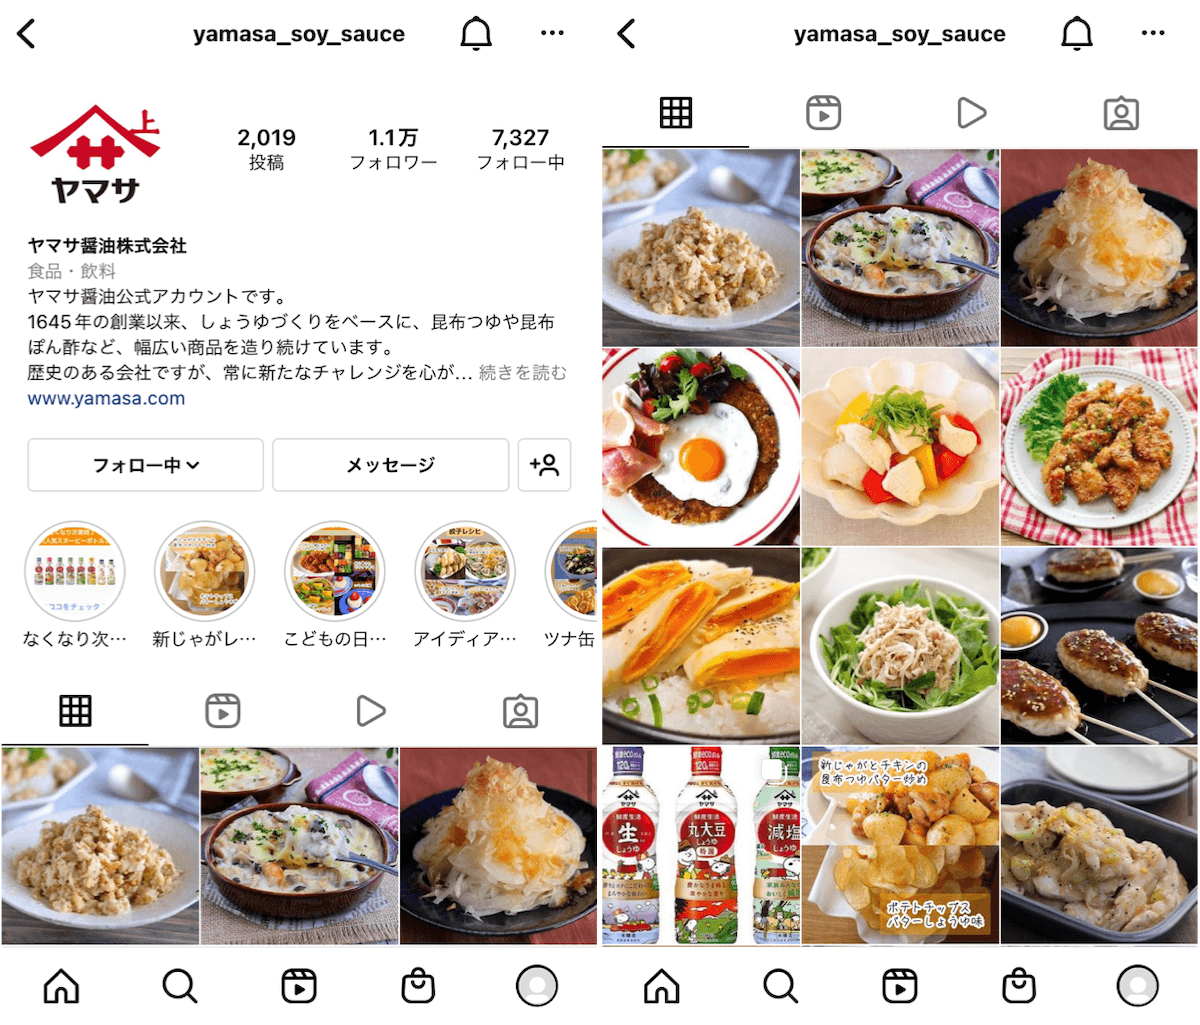 instagram-foods-official-yamasa_soy_sauce